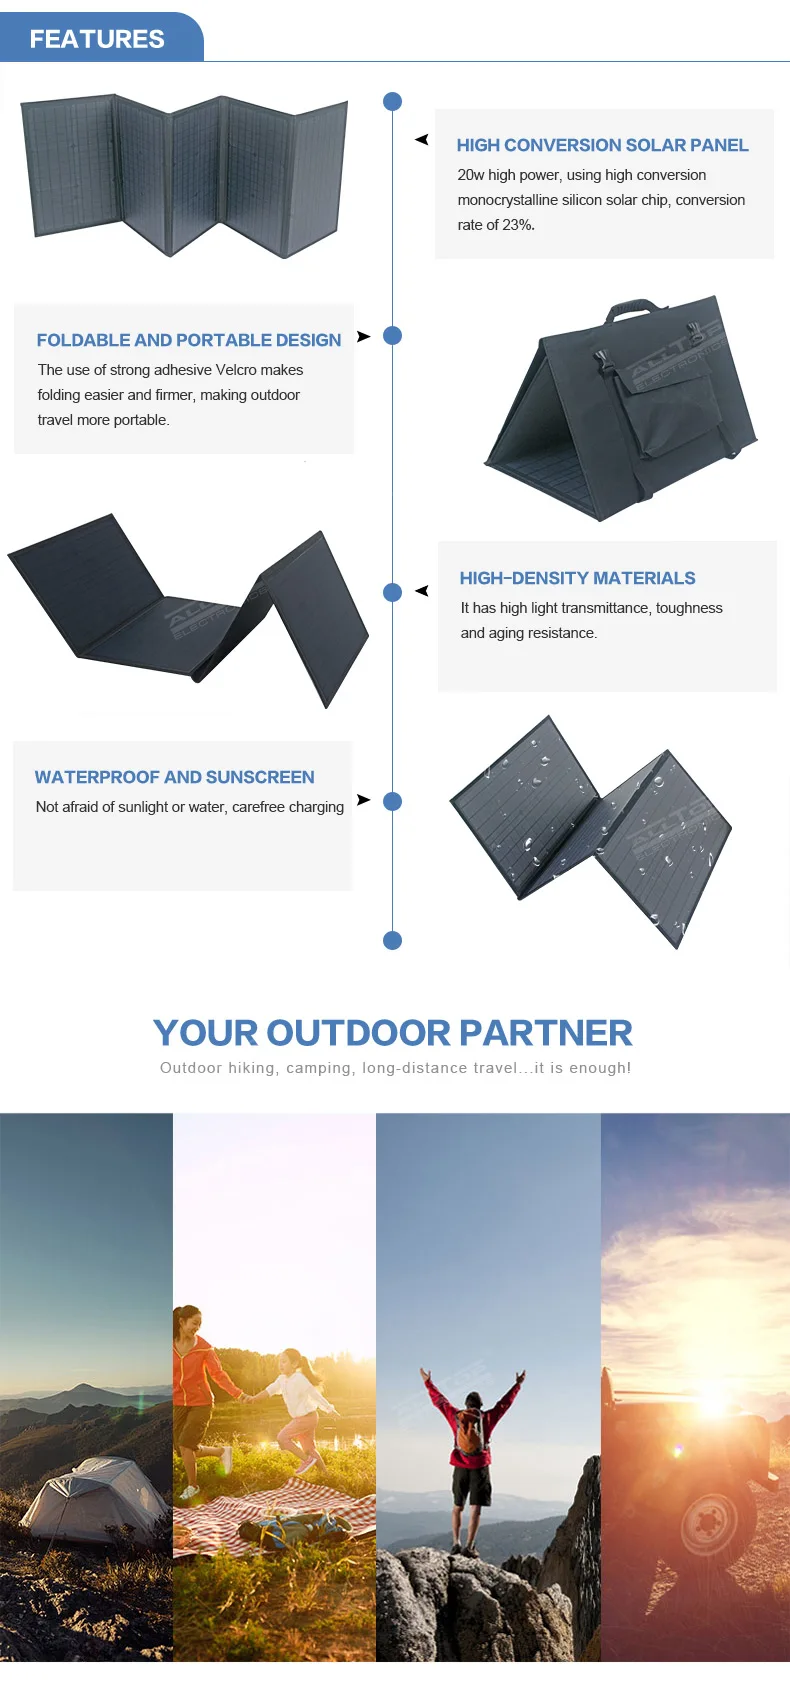 ALLTOP New arrived intelligent recognition is widely compatible waterproof 150w portable folding solar panel